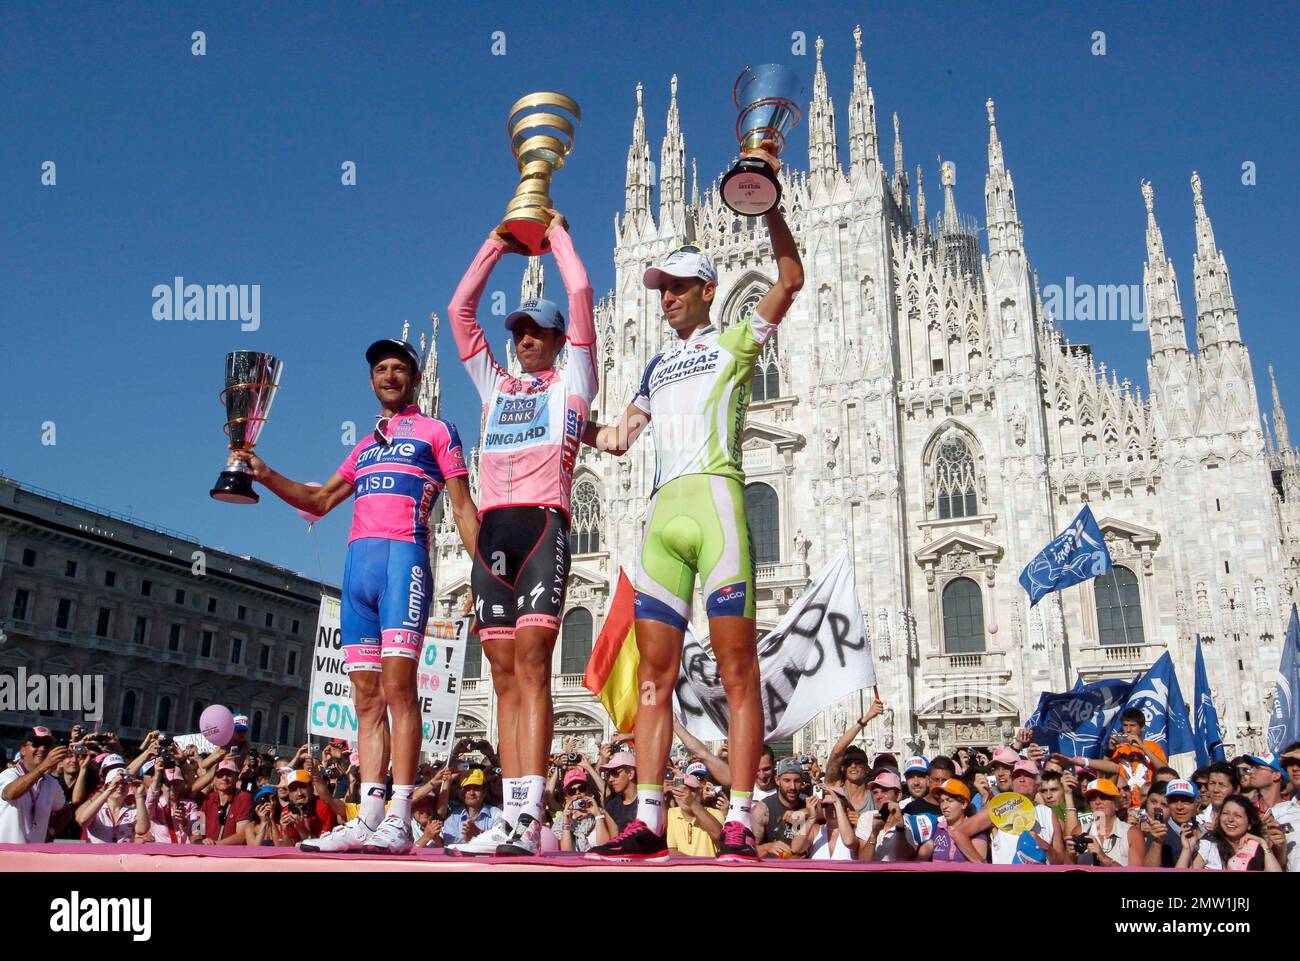 FILE - In this May 29, 2011 file photo, from left, second placed Michele  Scarponi of Italy, winner Alberto Contador of Spain and third placed  Vincenzo Nibali of Italy hold their trophies